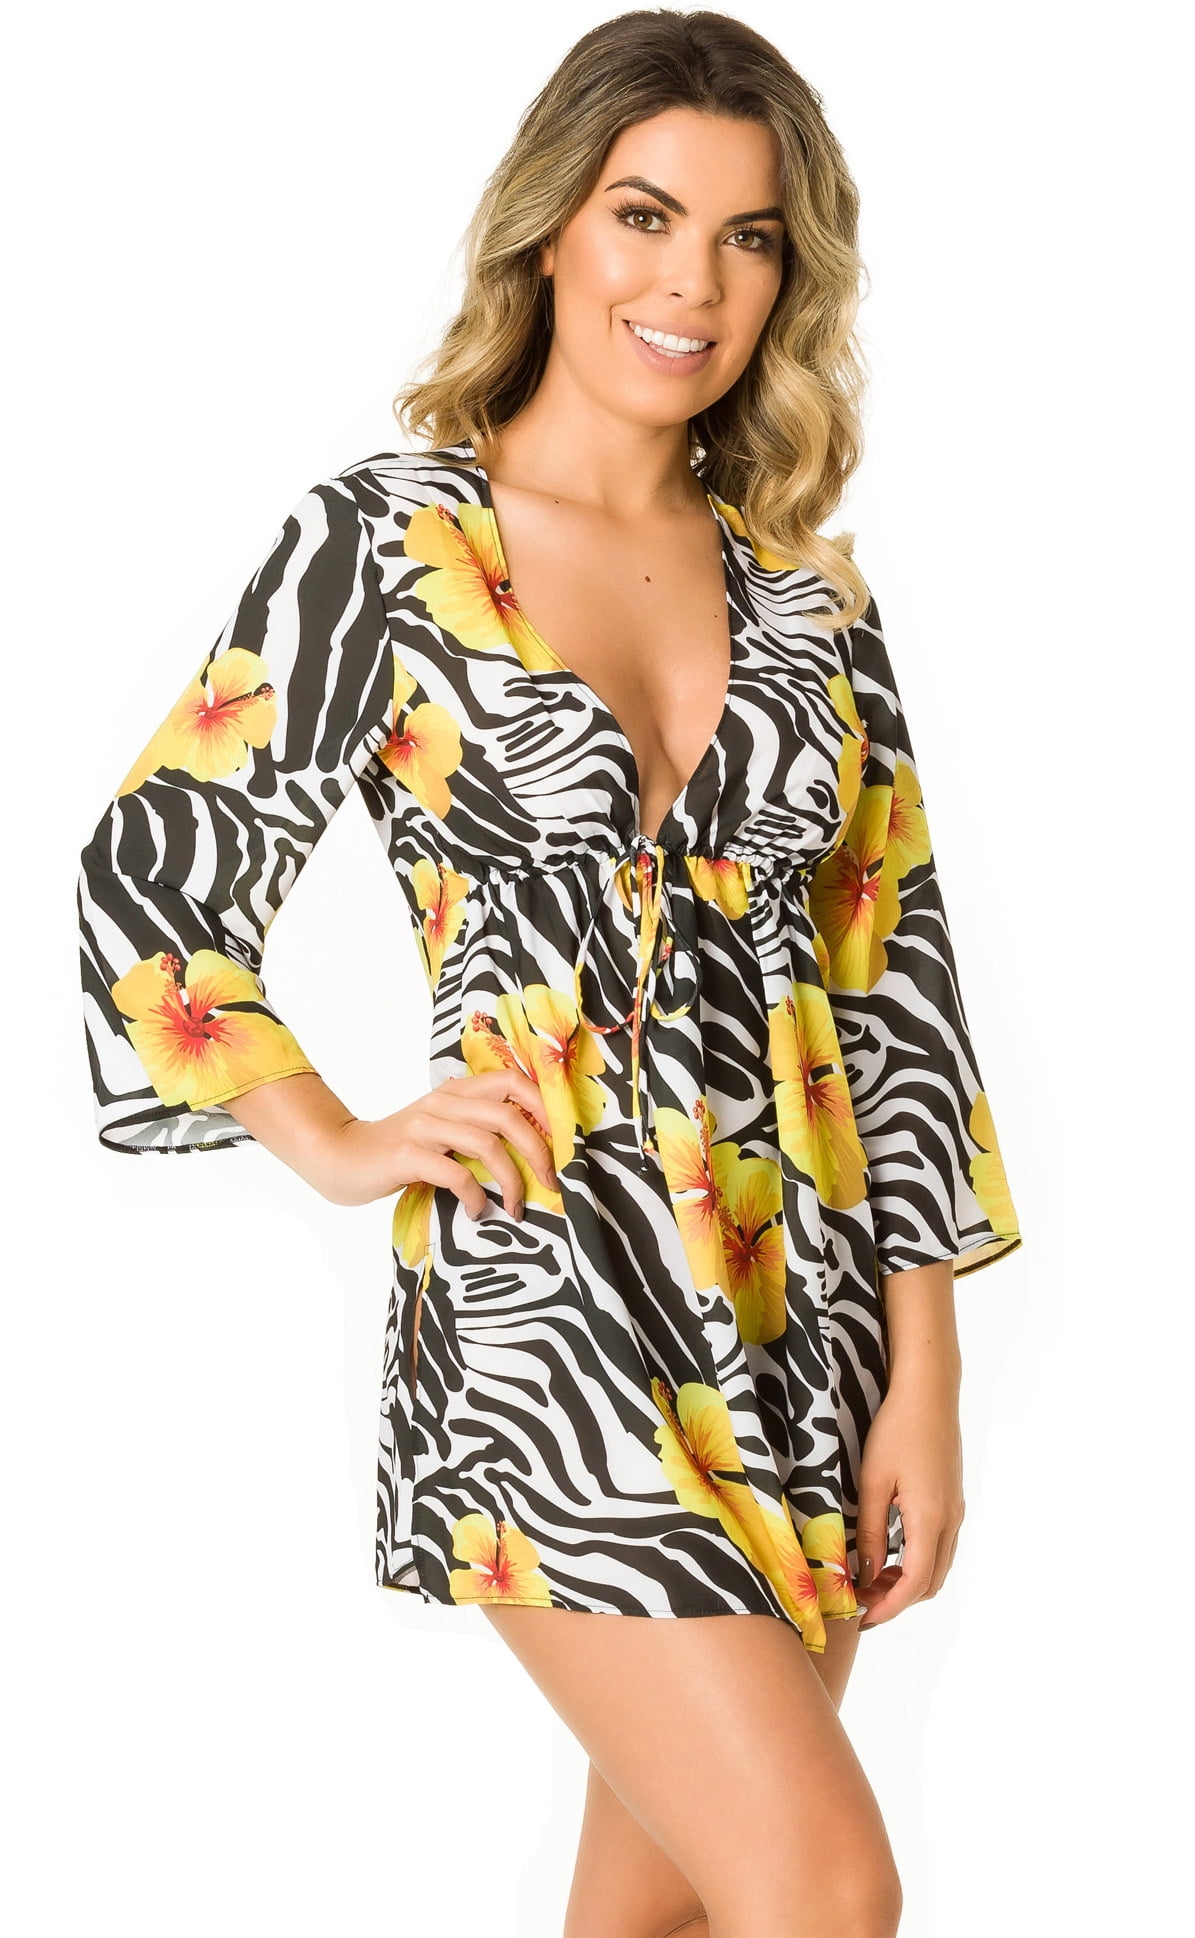 swimsuit cover up dress walmart